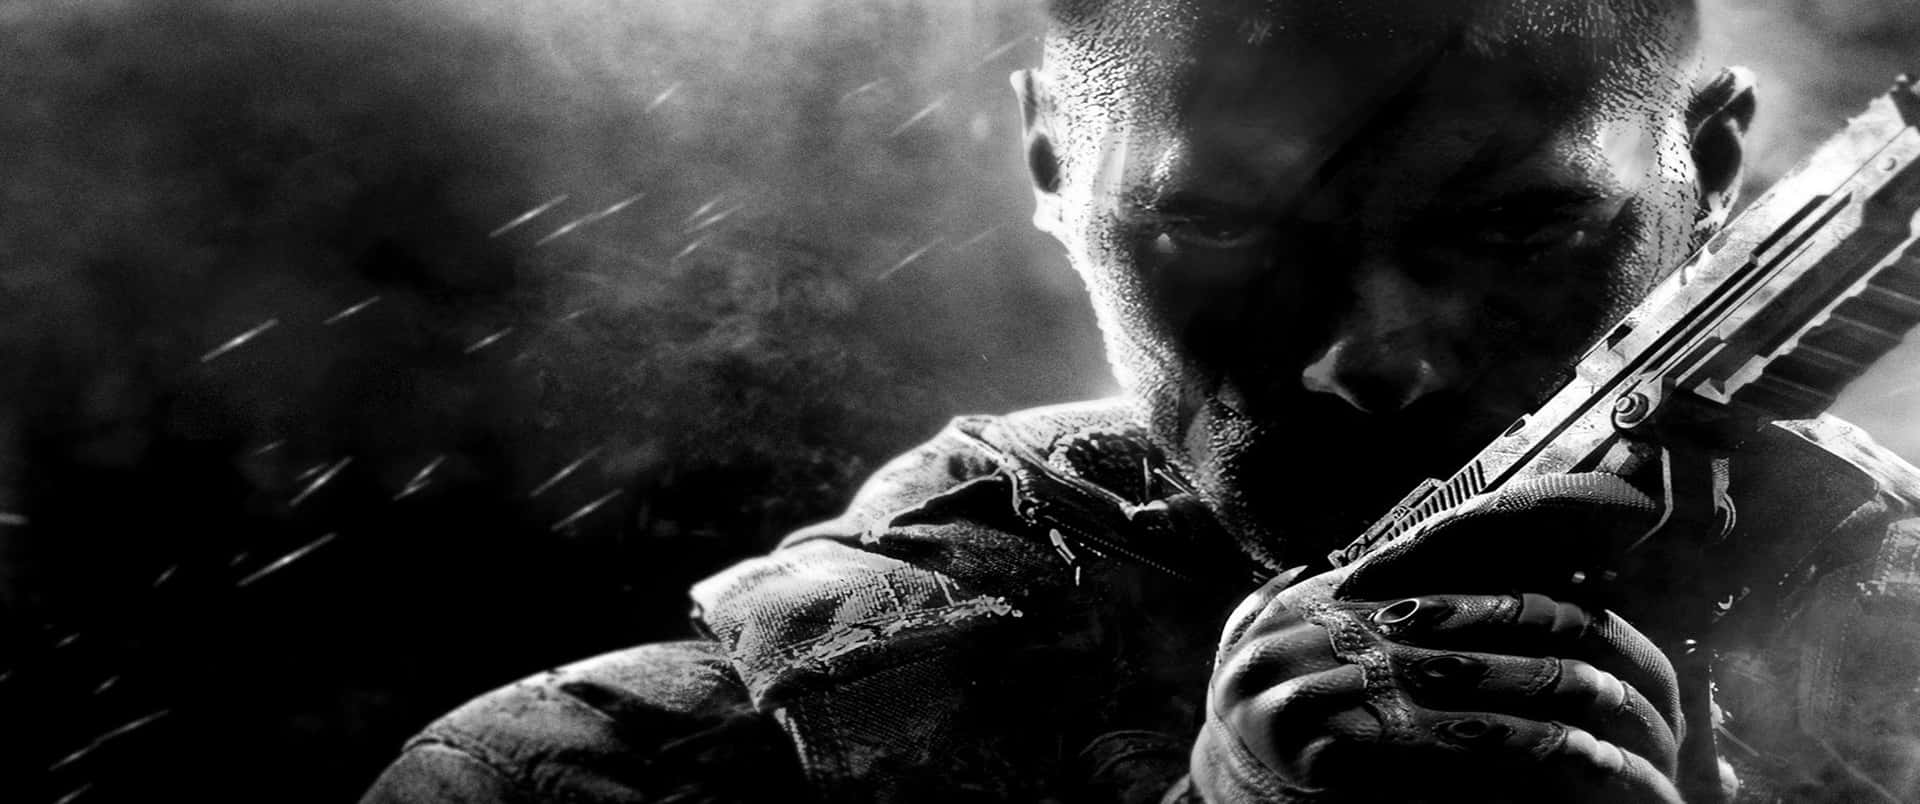 3440x1440pcall Of Duty Black Ops Cold War Monochromatic Bakgrund